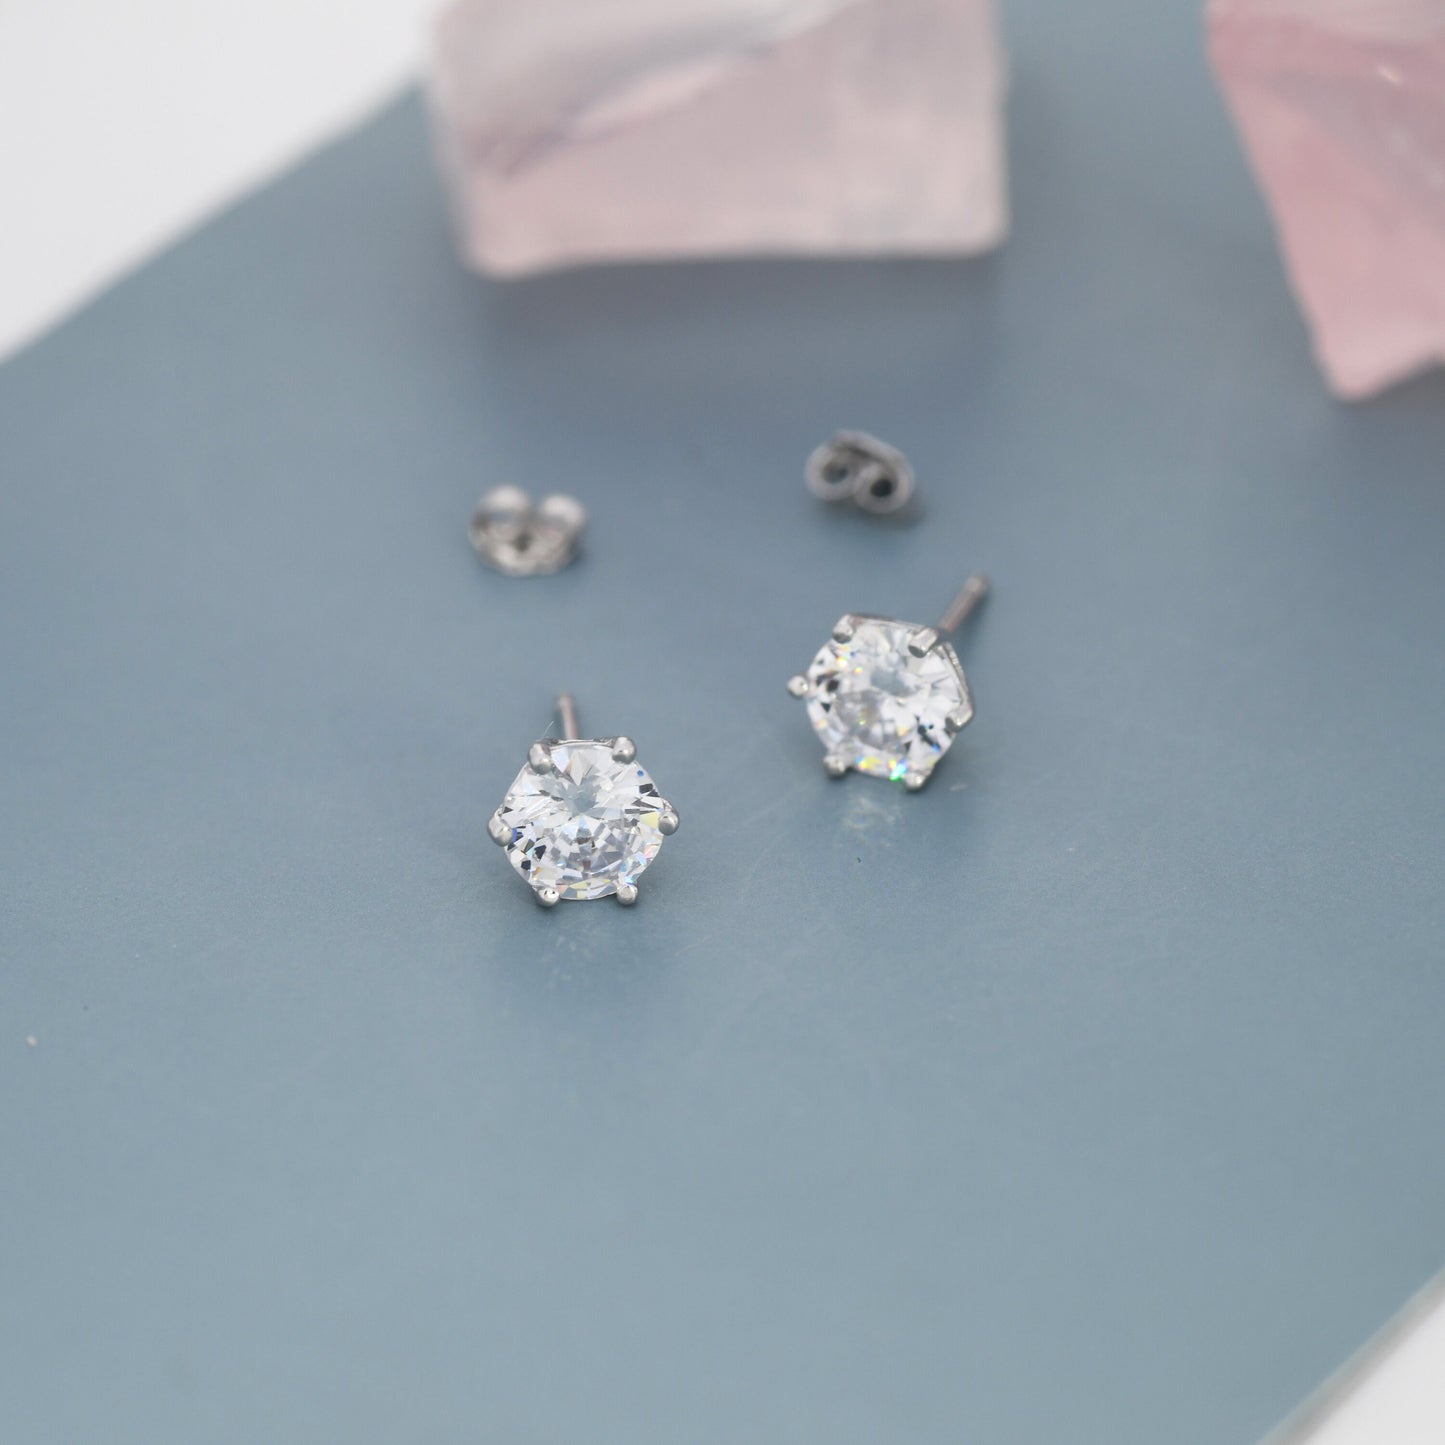 Simple CZ Crystal Stud Earrings in Sterling Silver, 3mm, 4mm, 5mm and 6mm, Six Prong, 6 Prong,  Various Sizes, Minimalist CZ Stud